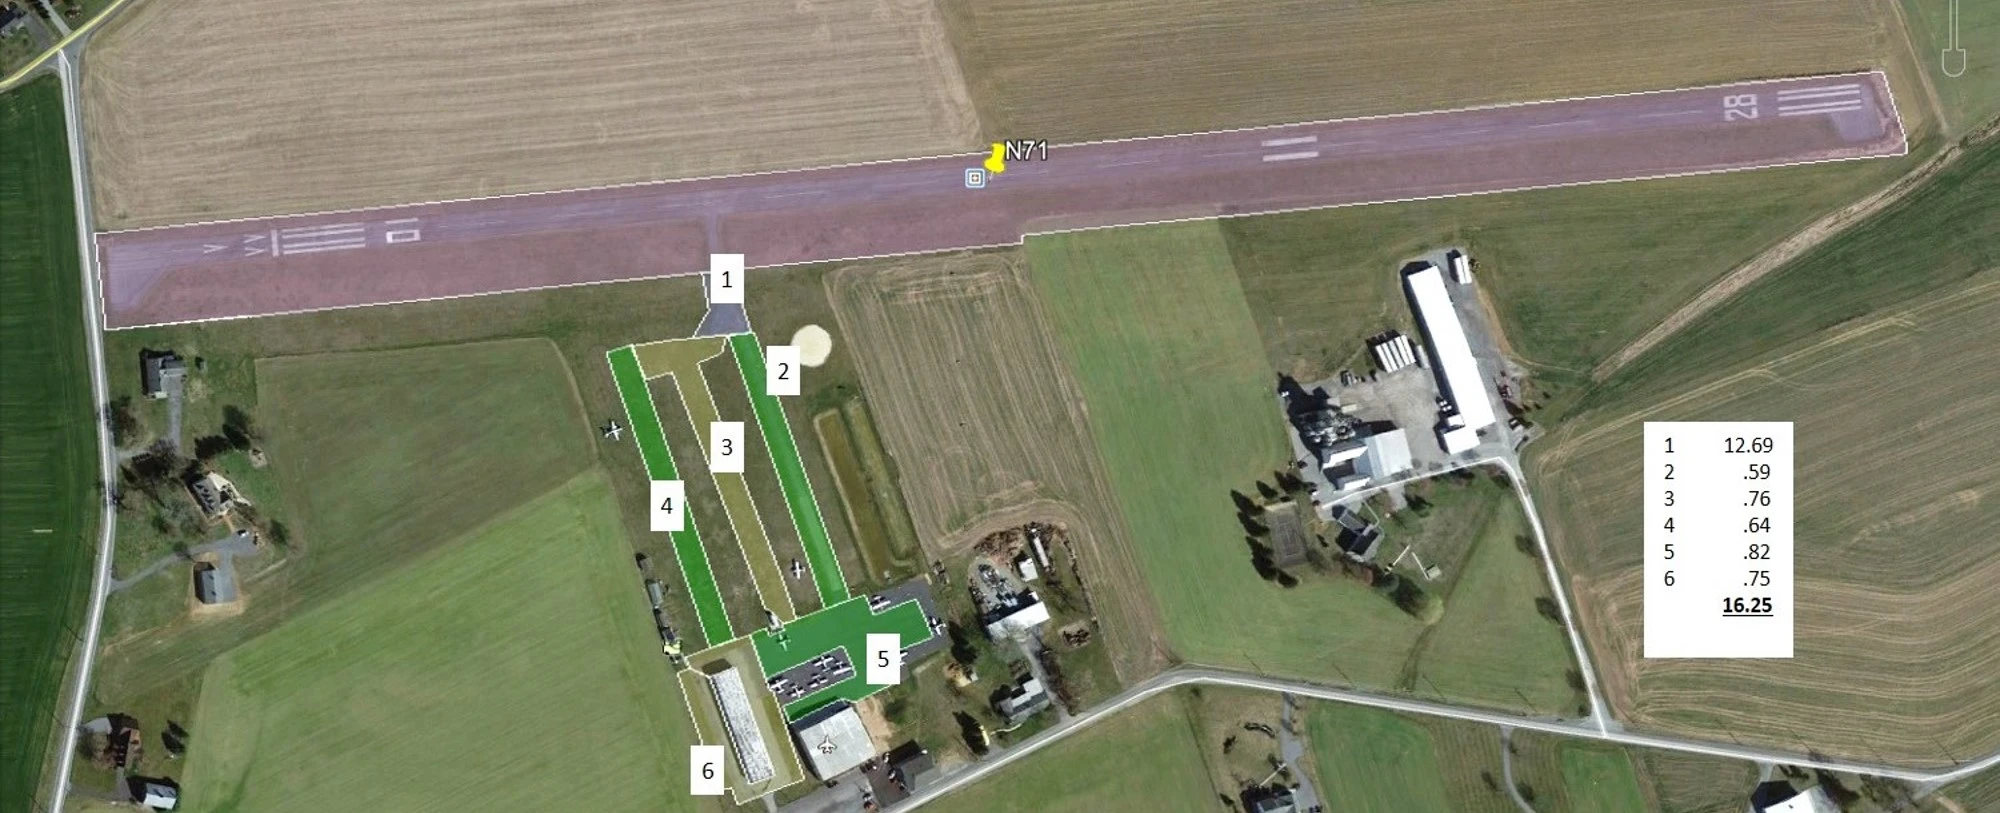 An aerial image of a rural airport runway and hangar with grassy fields and farmland on either side and marked indicators for areas of interest.